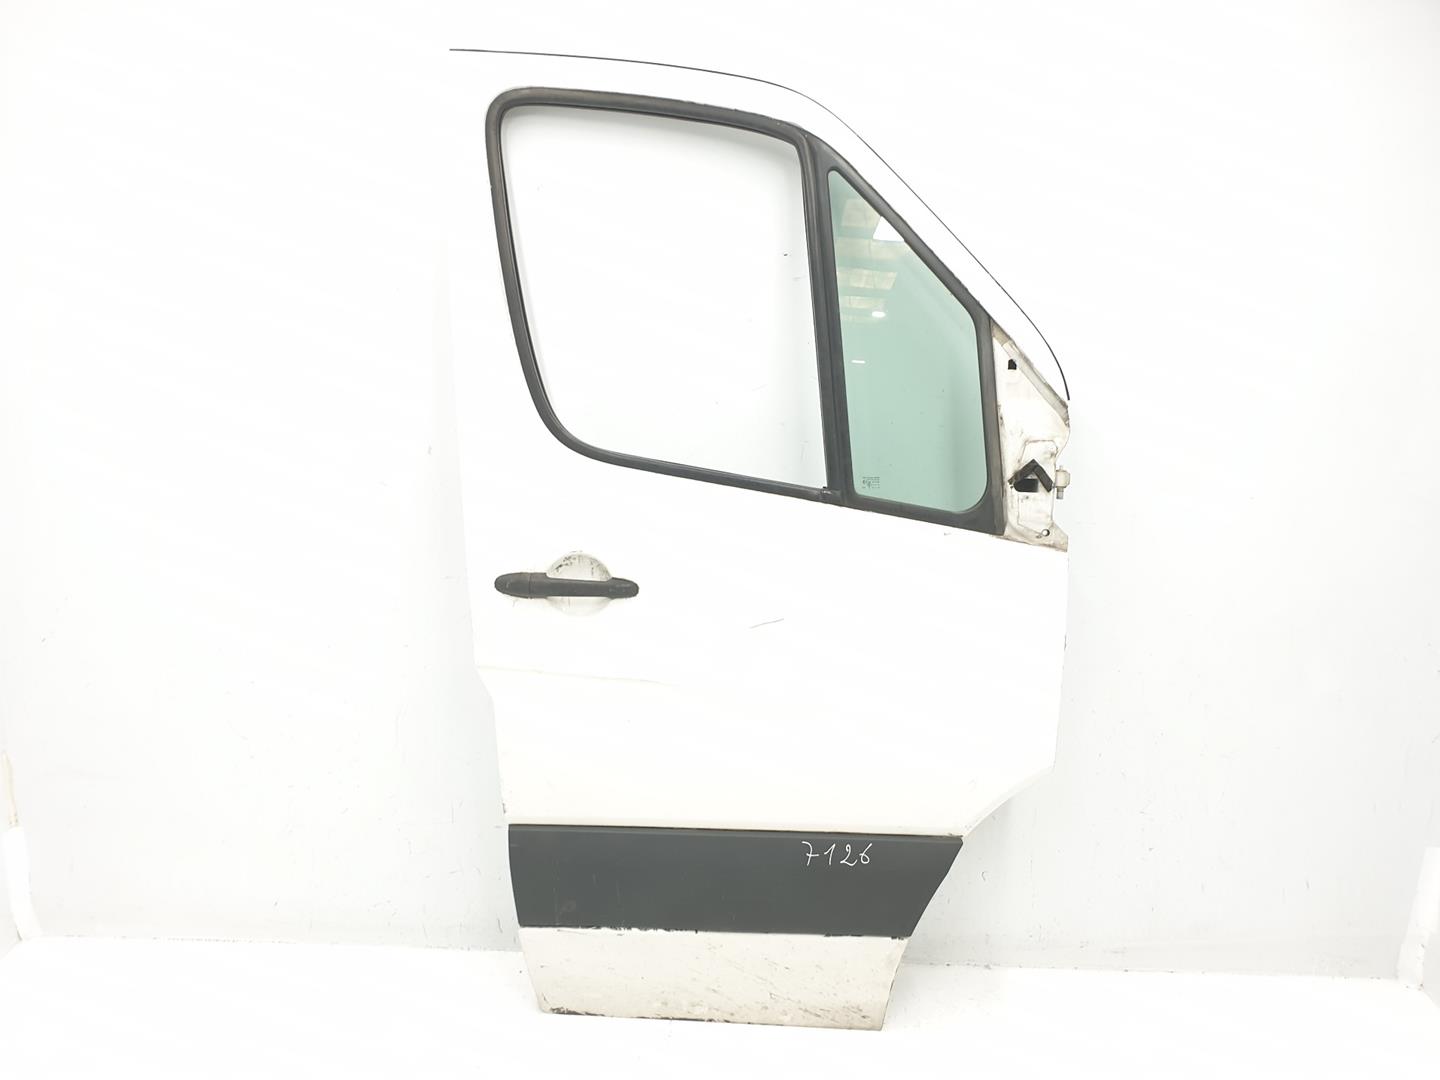 VOLKSWAGEN Crafter 1 generation Front Right Door 2E0831052, 2E0831052, COLORBLANCOB9A 24473661